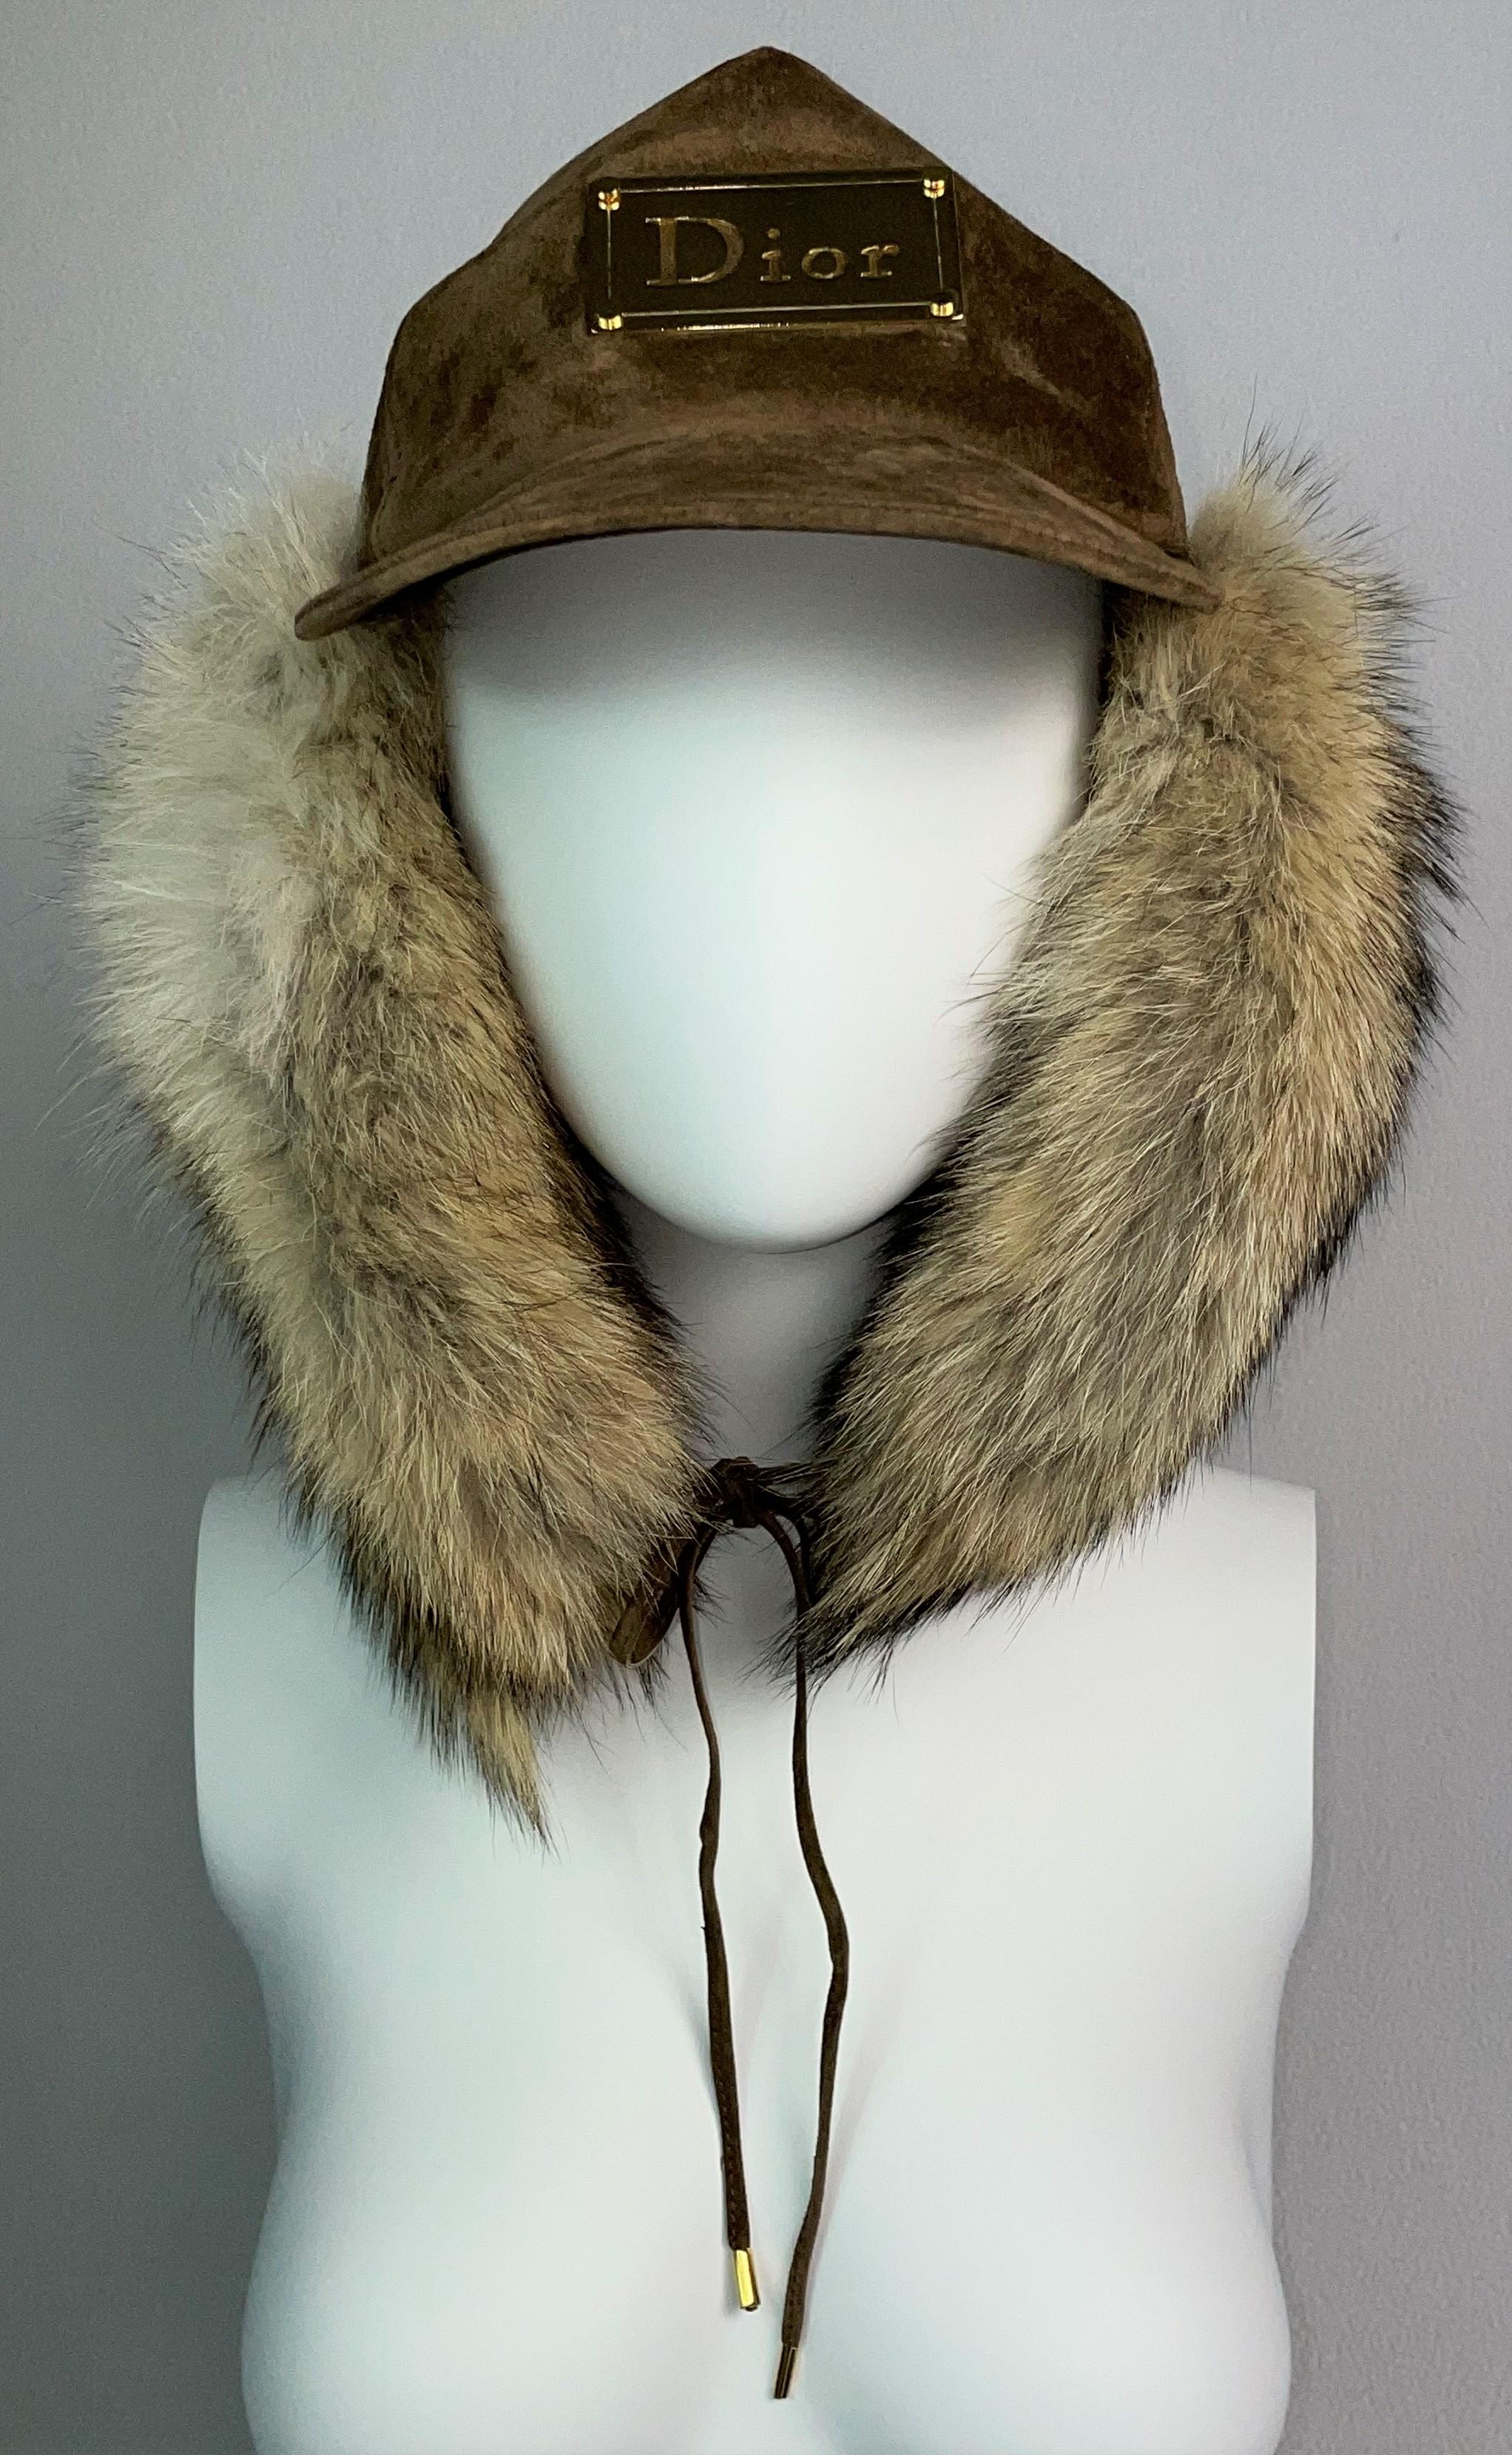 DESIGNER: 2002 Christian Dior by John Galliano
CONDITION: Good- no holes or stains
FABRIC: Leather & coyote fur
COUNTRY: France
SIZE: 57